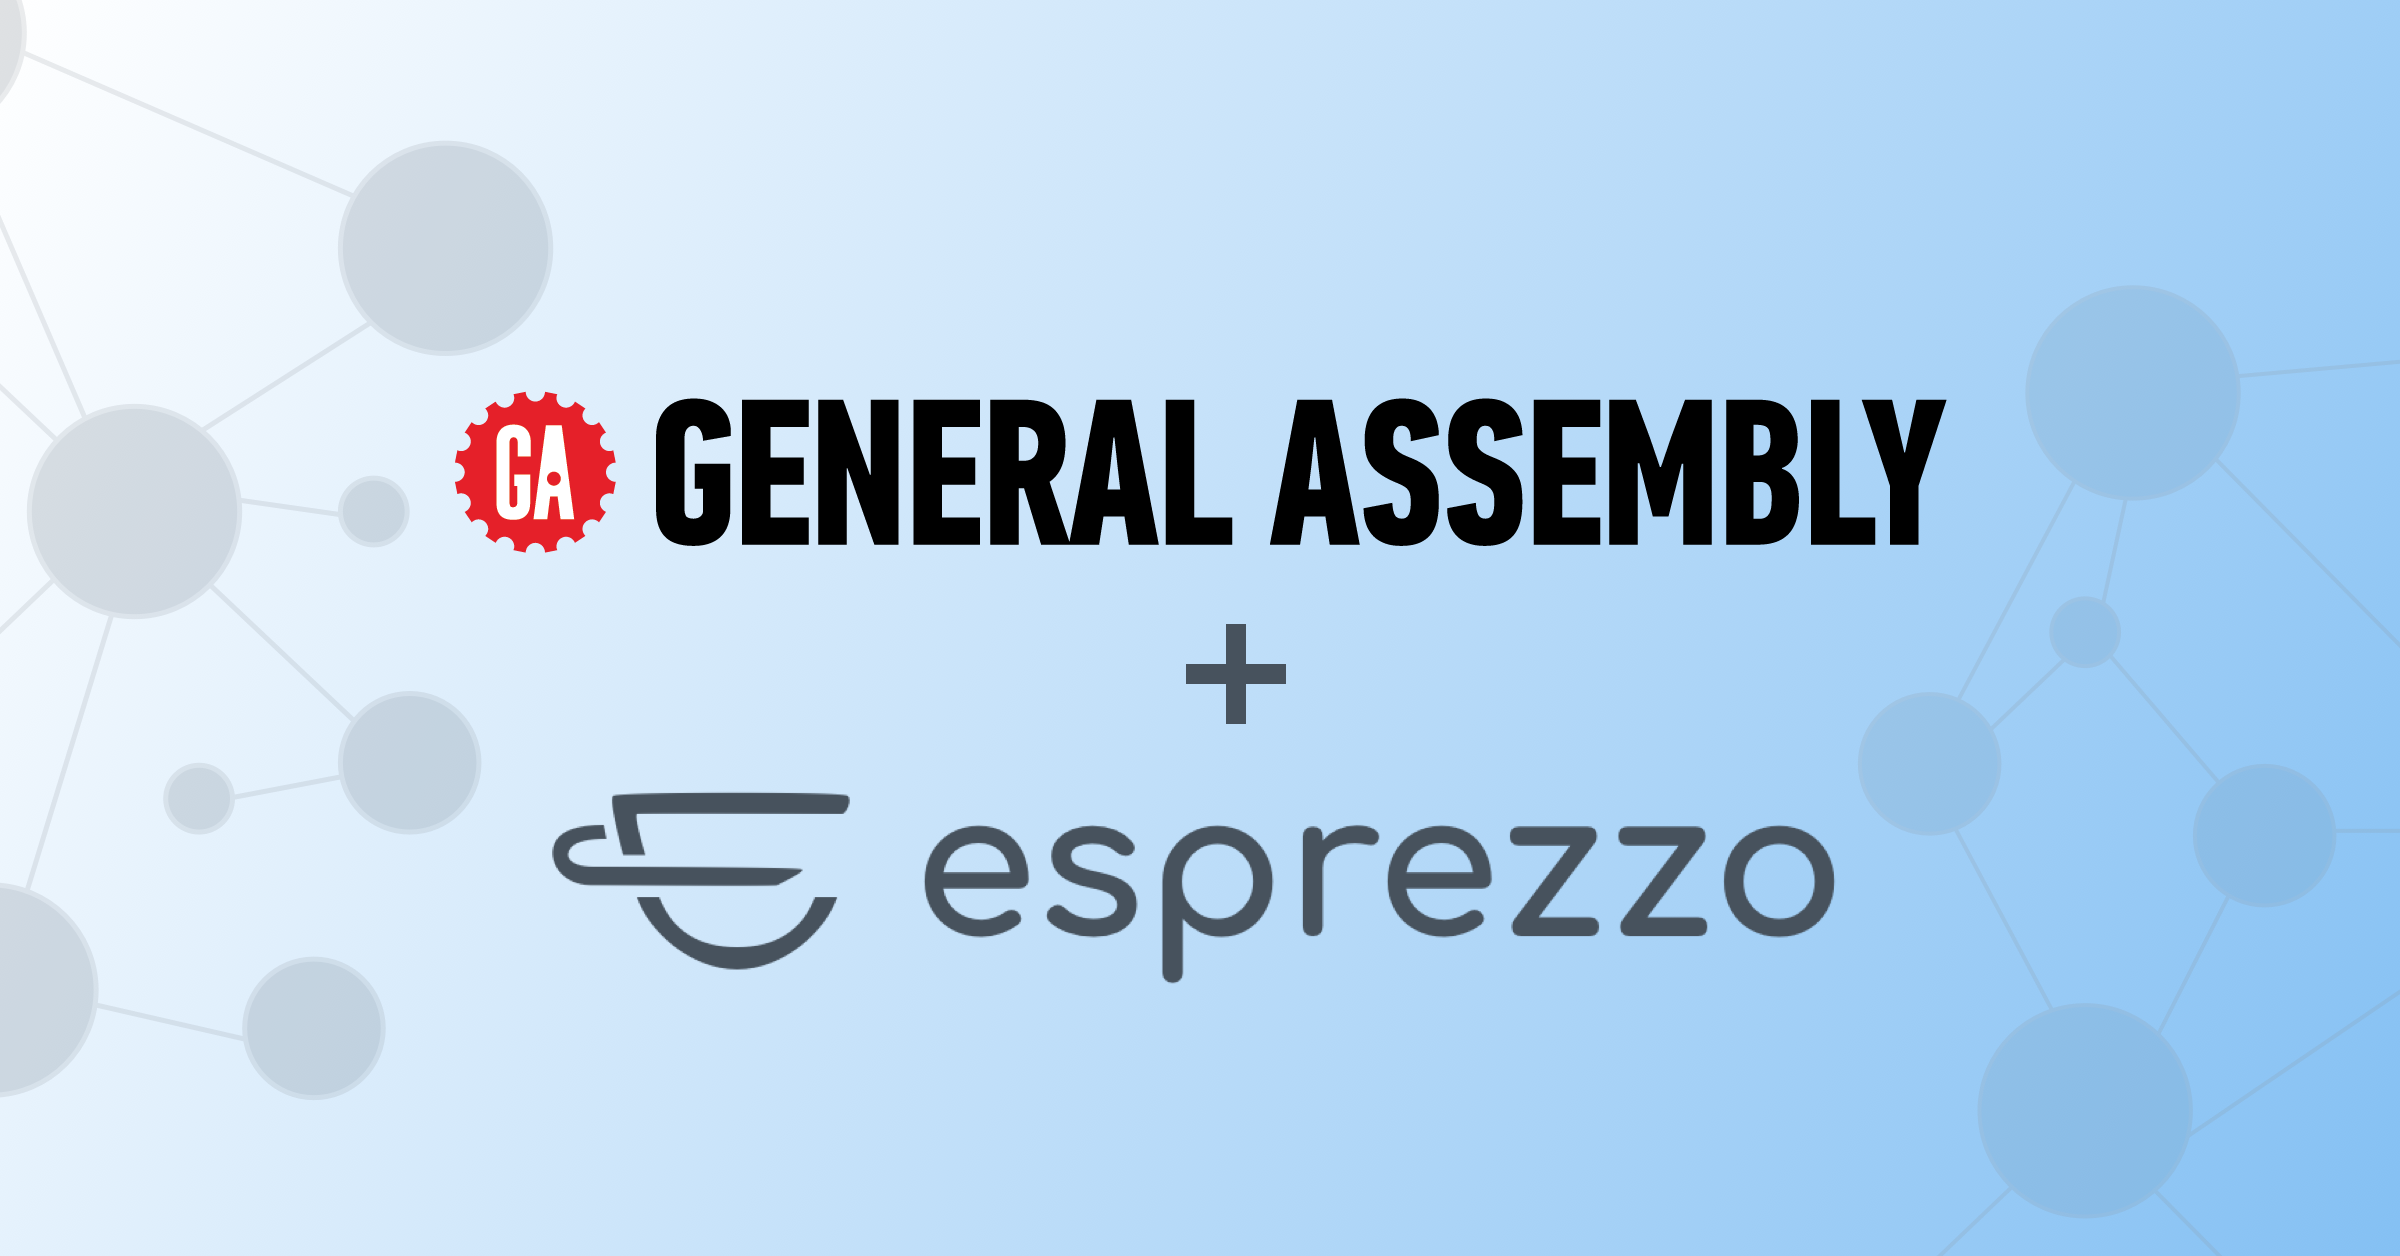 General Assembly and Esprezzo logos